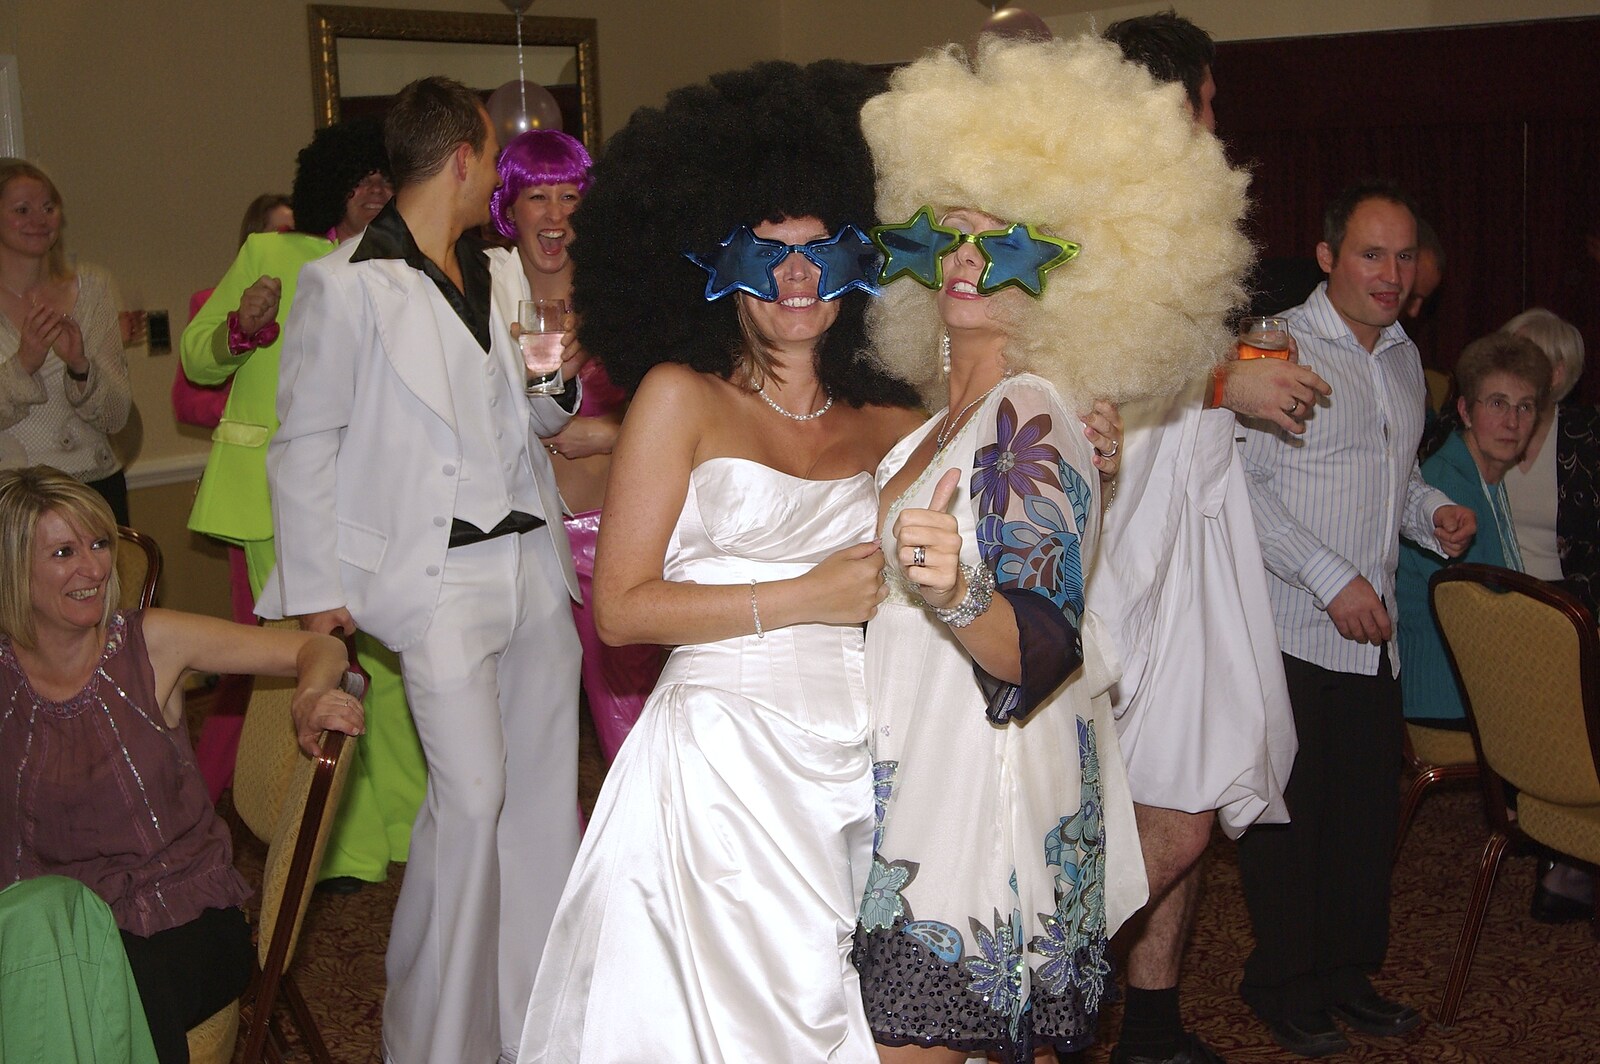 Wigs and funky shades from A BSCC Presentation, and Matt's Wedding Reception, Solihull - 6th October 2007